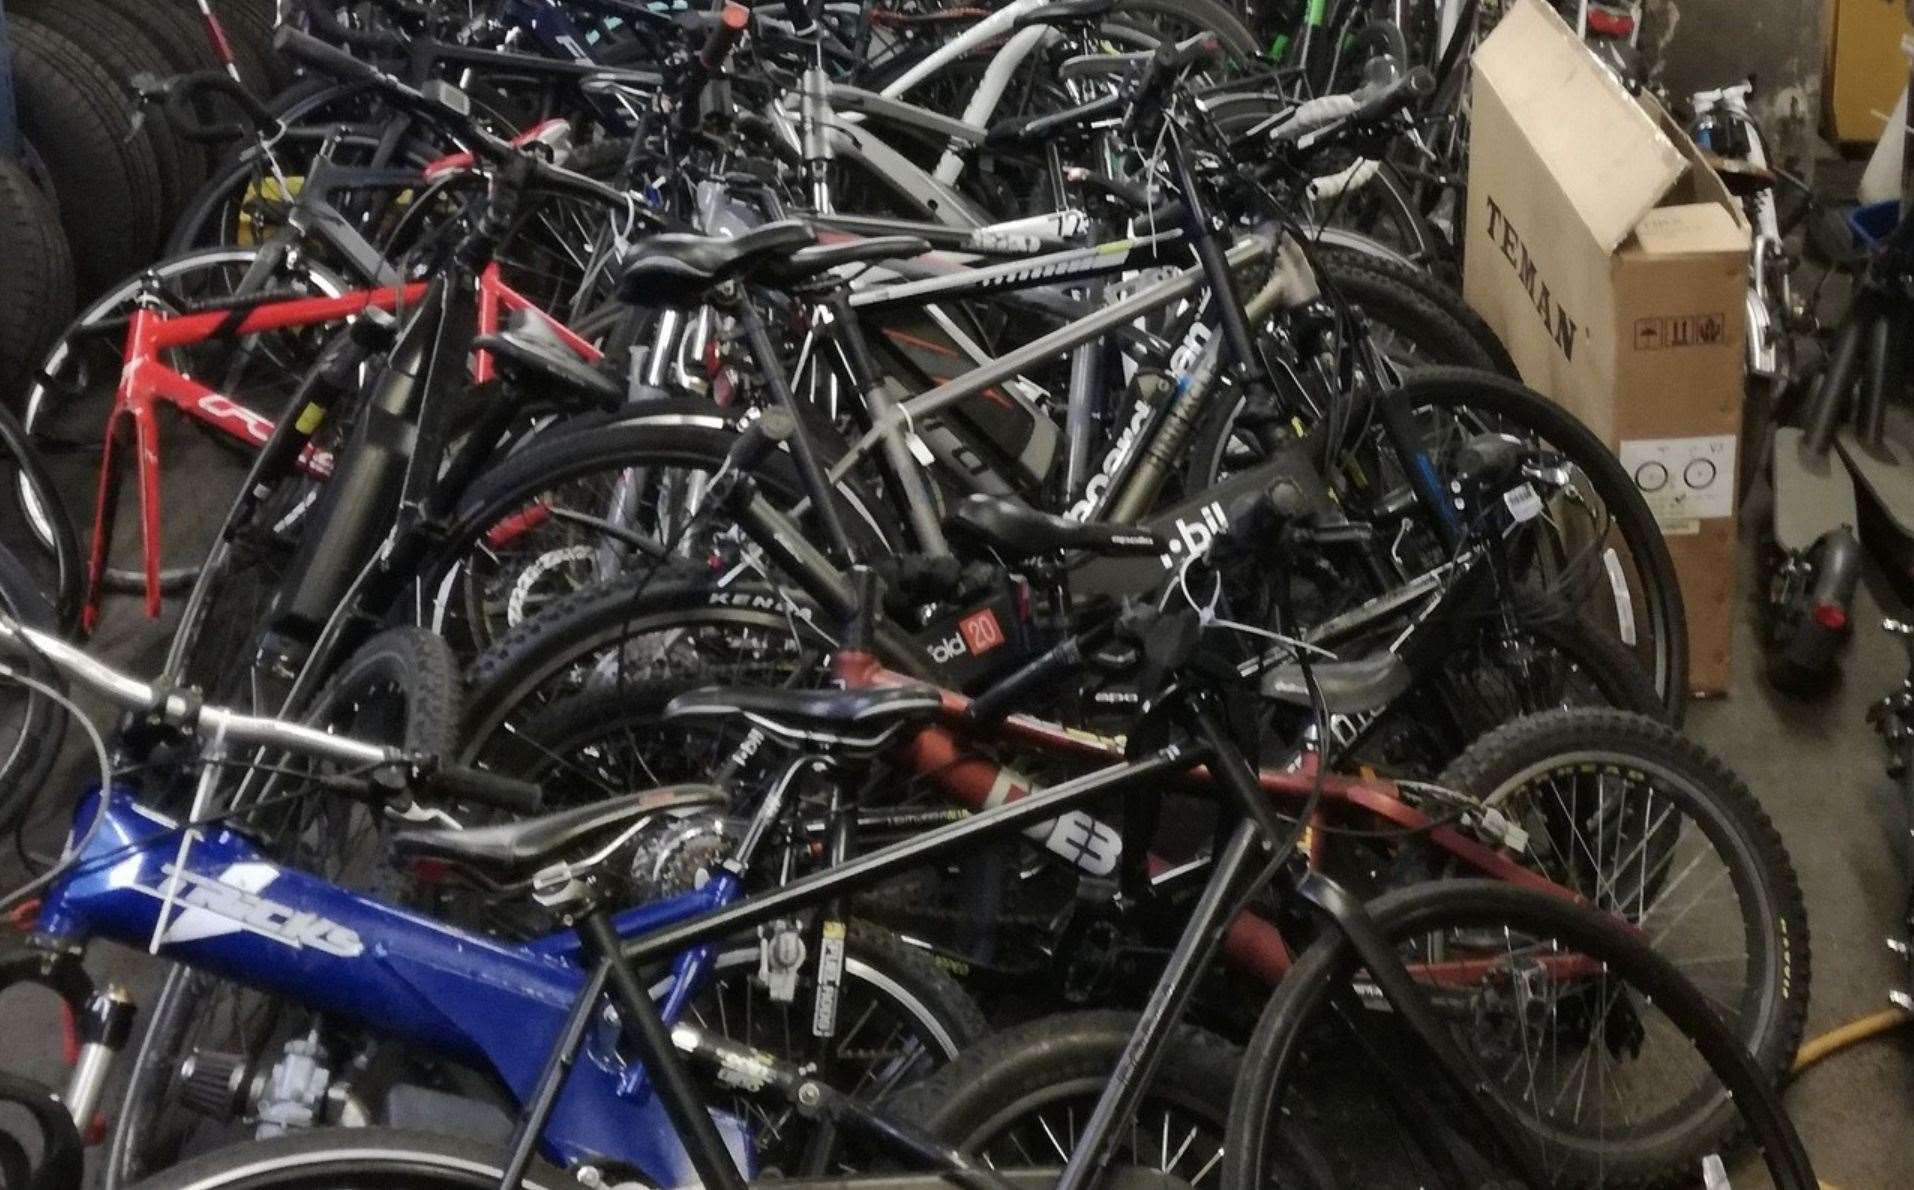 Some of the pushbikes recovered. Picture: City of London Police